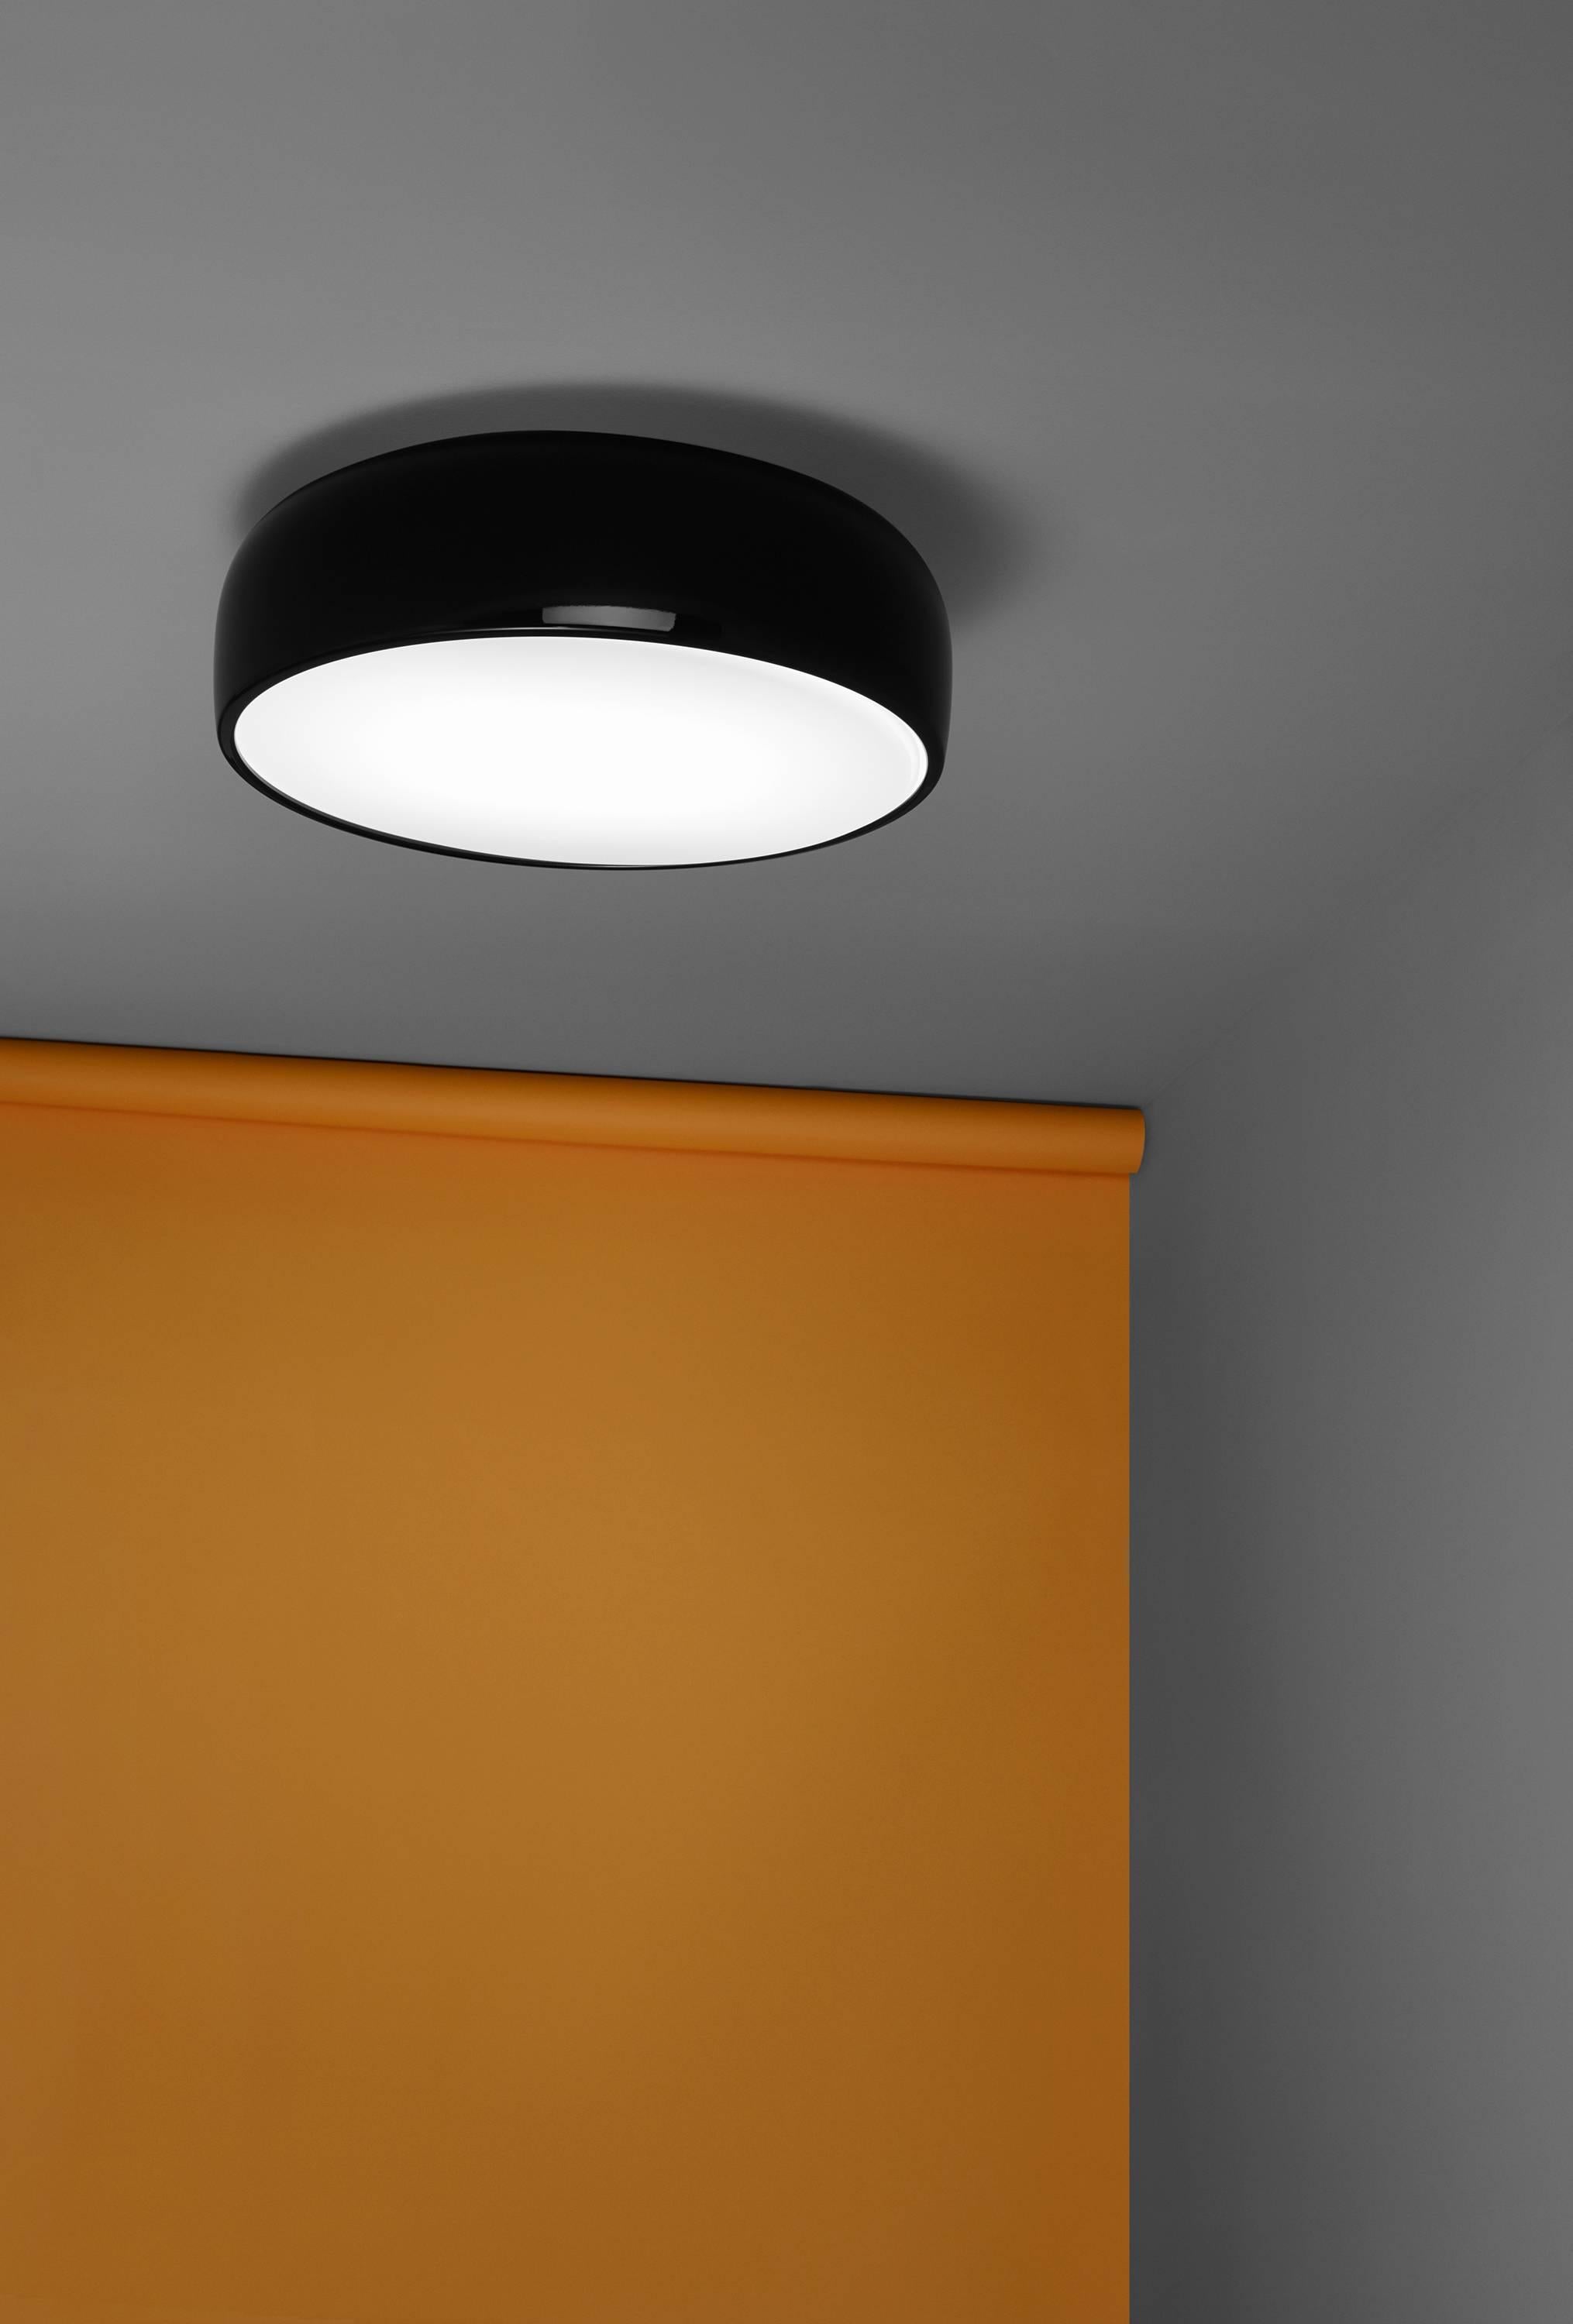 Part of the Smithfield family, the Smithfield C ceiling-mounted lamp manages to be both grand and unassuming. Providing direct light through its aluminum body, it is well suited for a variety of environments. Available in gloss black, white, or mud,